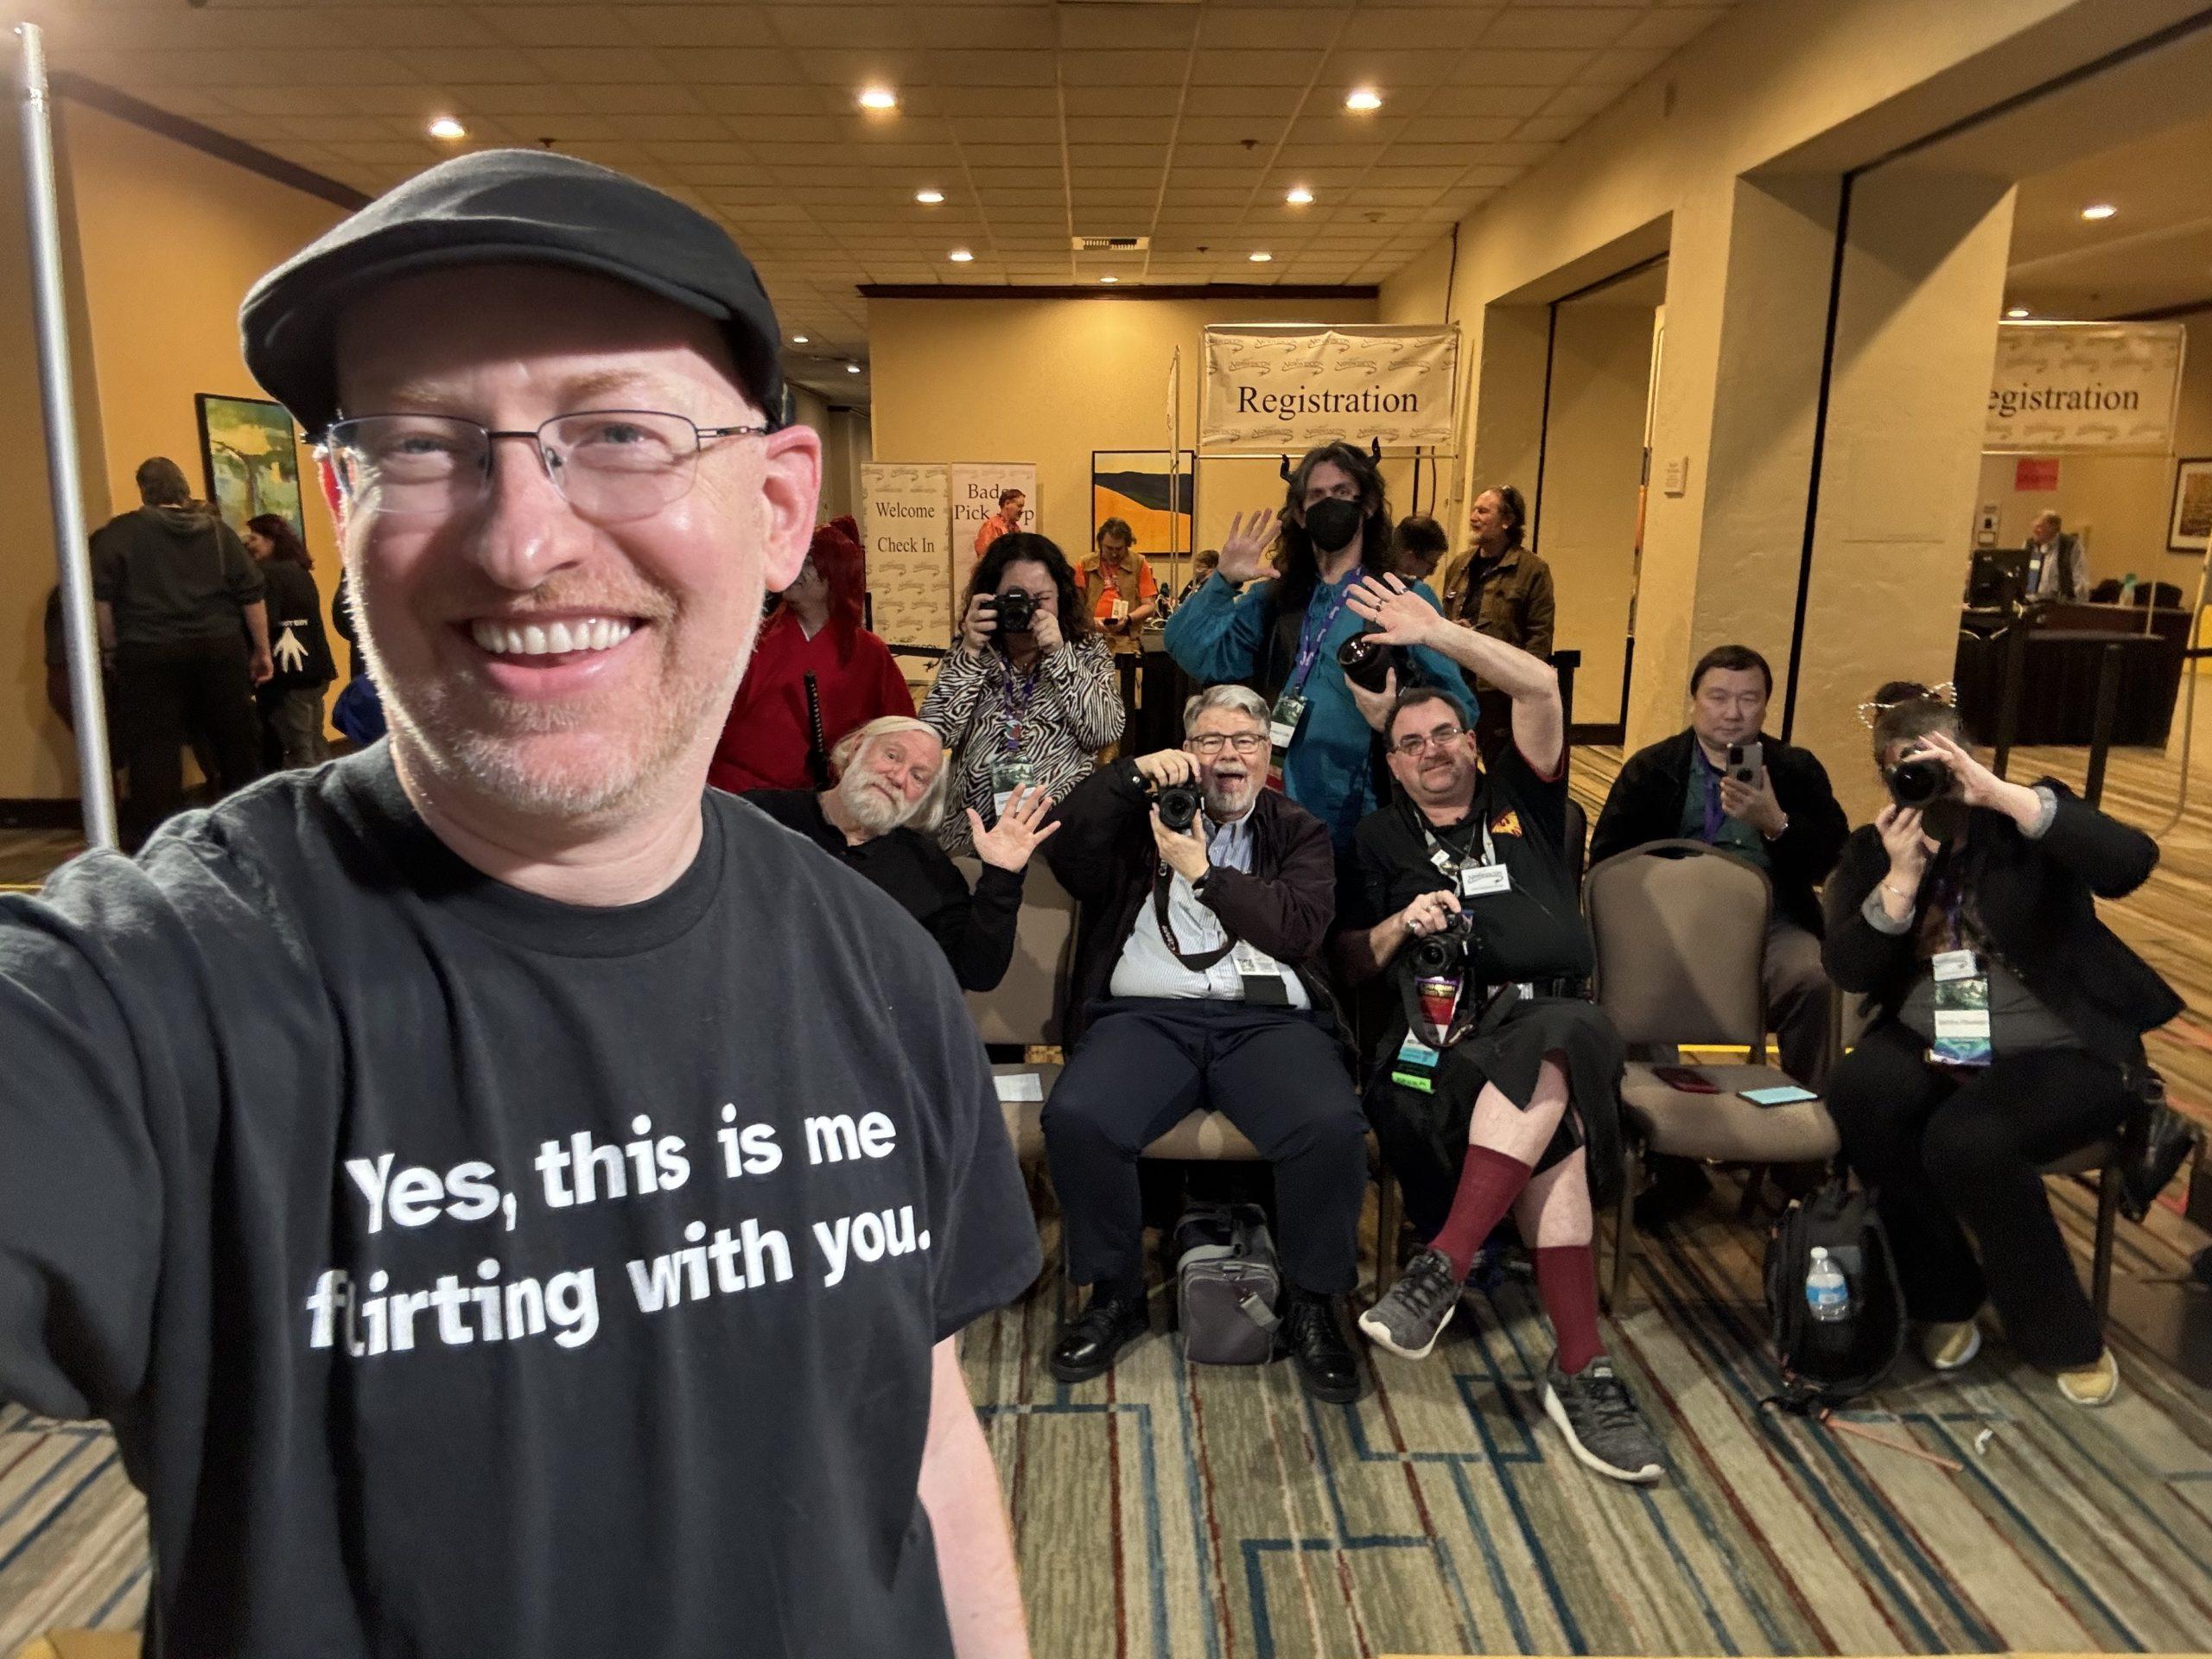 Me wearing a shirt that says 'yes, this is me flirting with you', standing in front of a group of convention photographers with their cameras aimed at me.